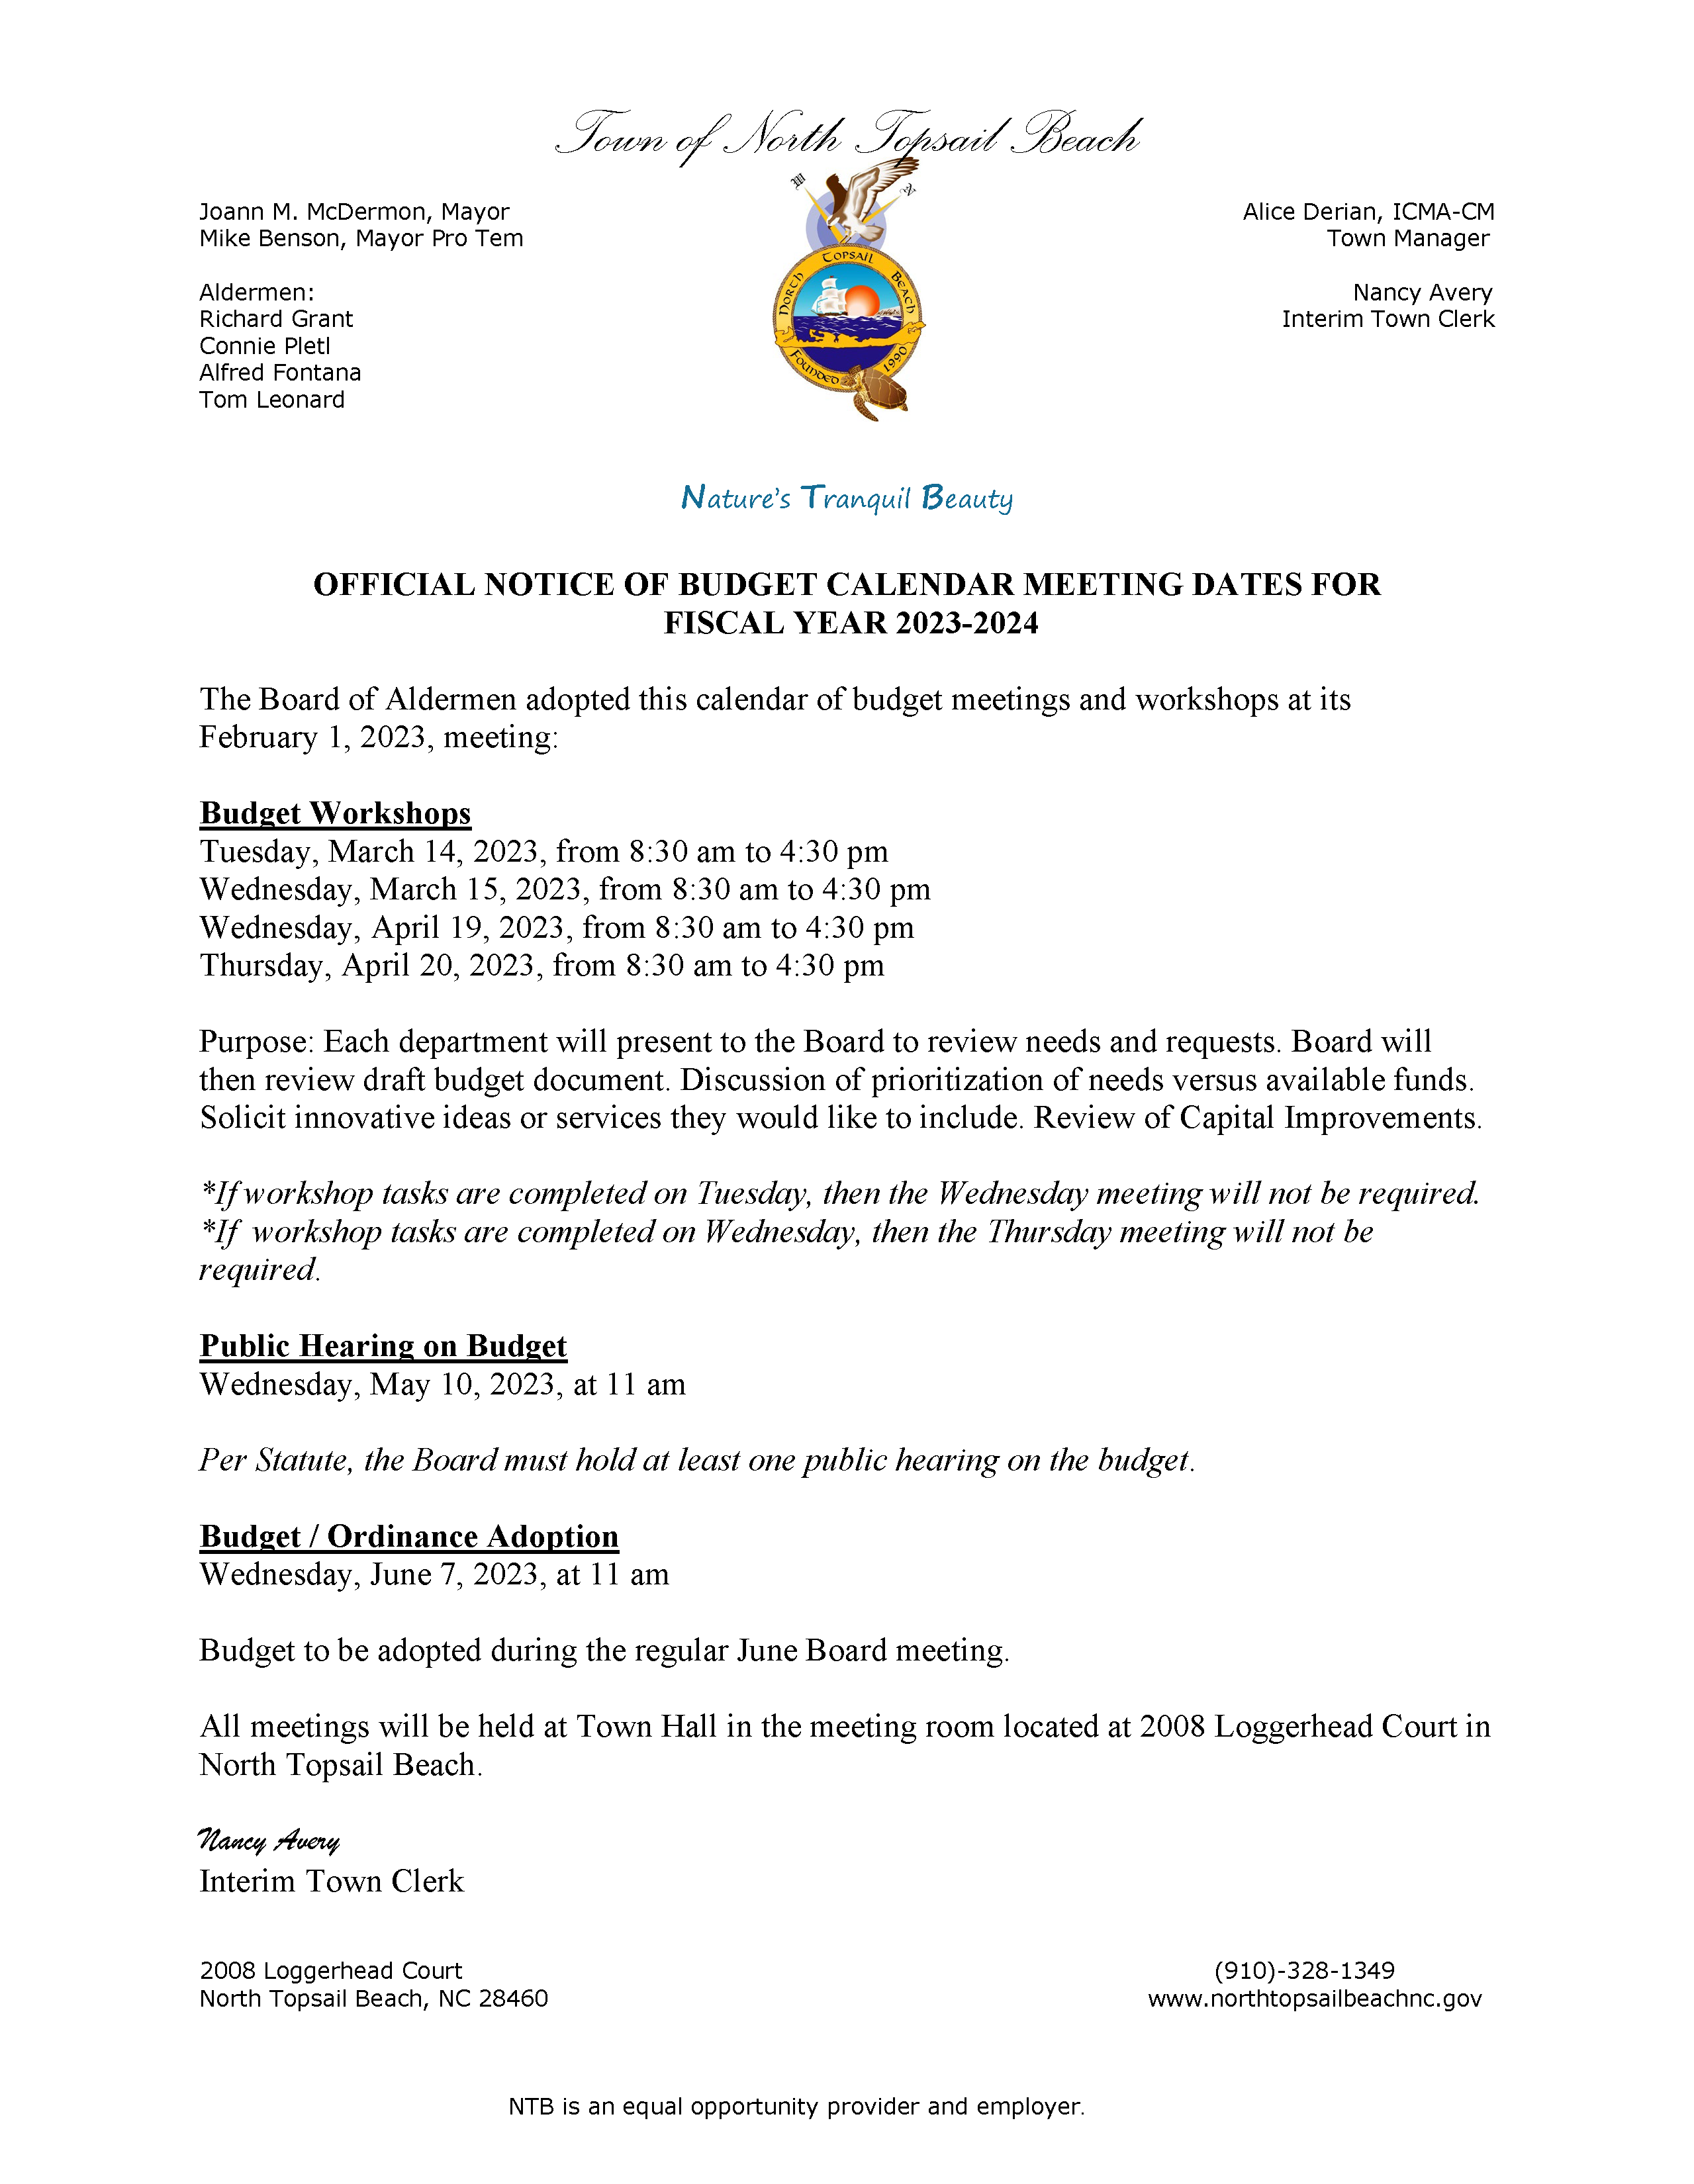 official-notice-of-budget-calendar-meeting-dates-for-fiscal-year-2023-2024-north-topsail-beach